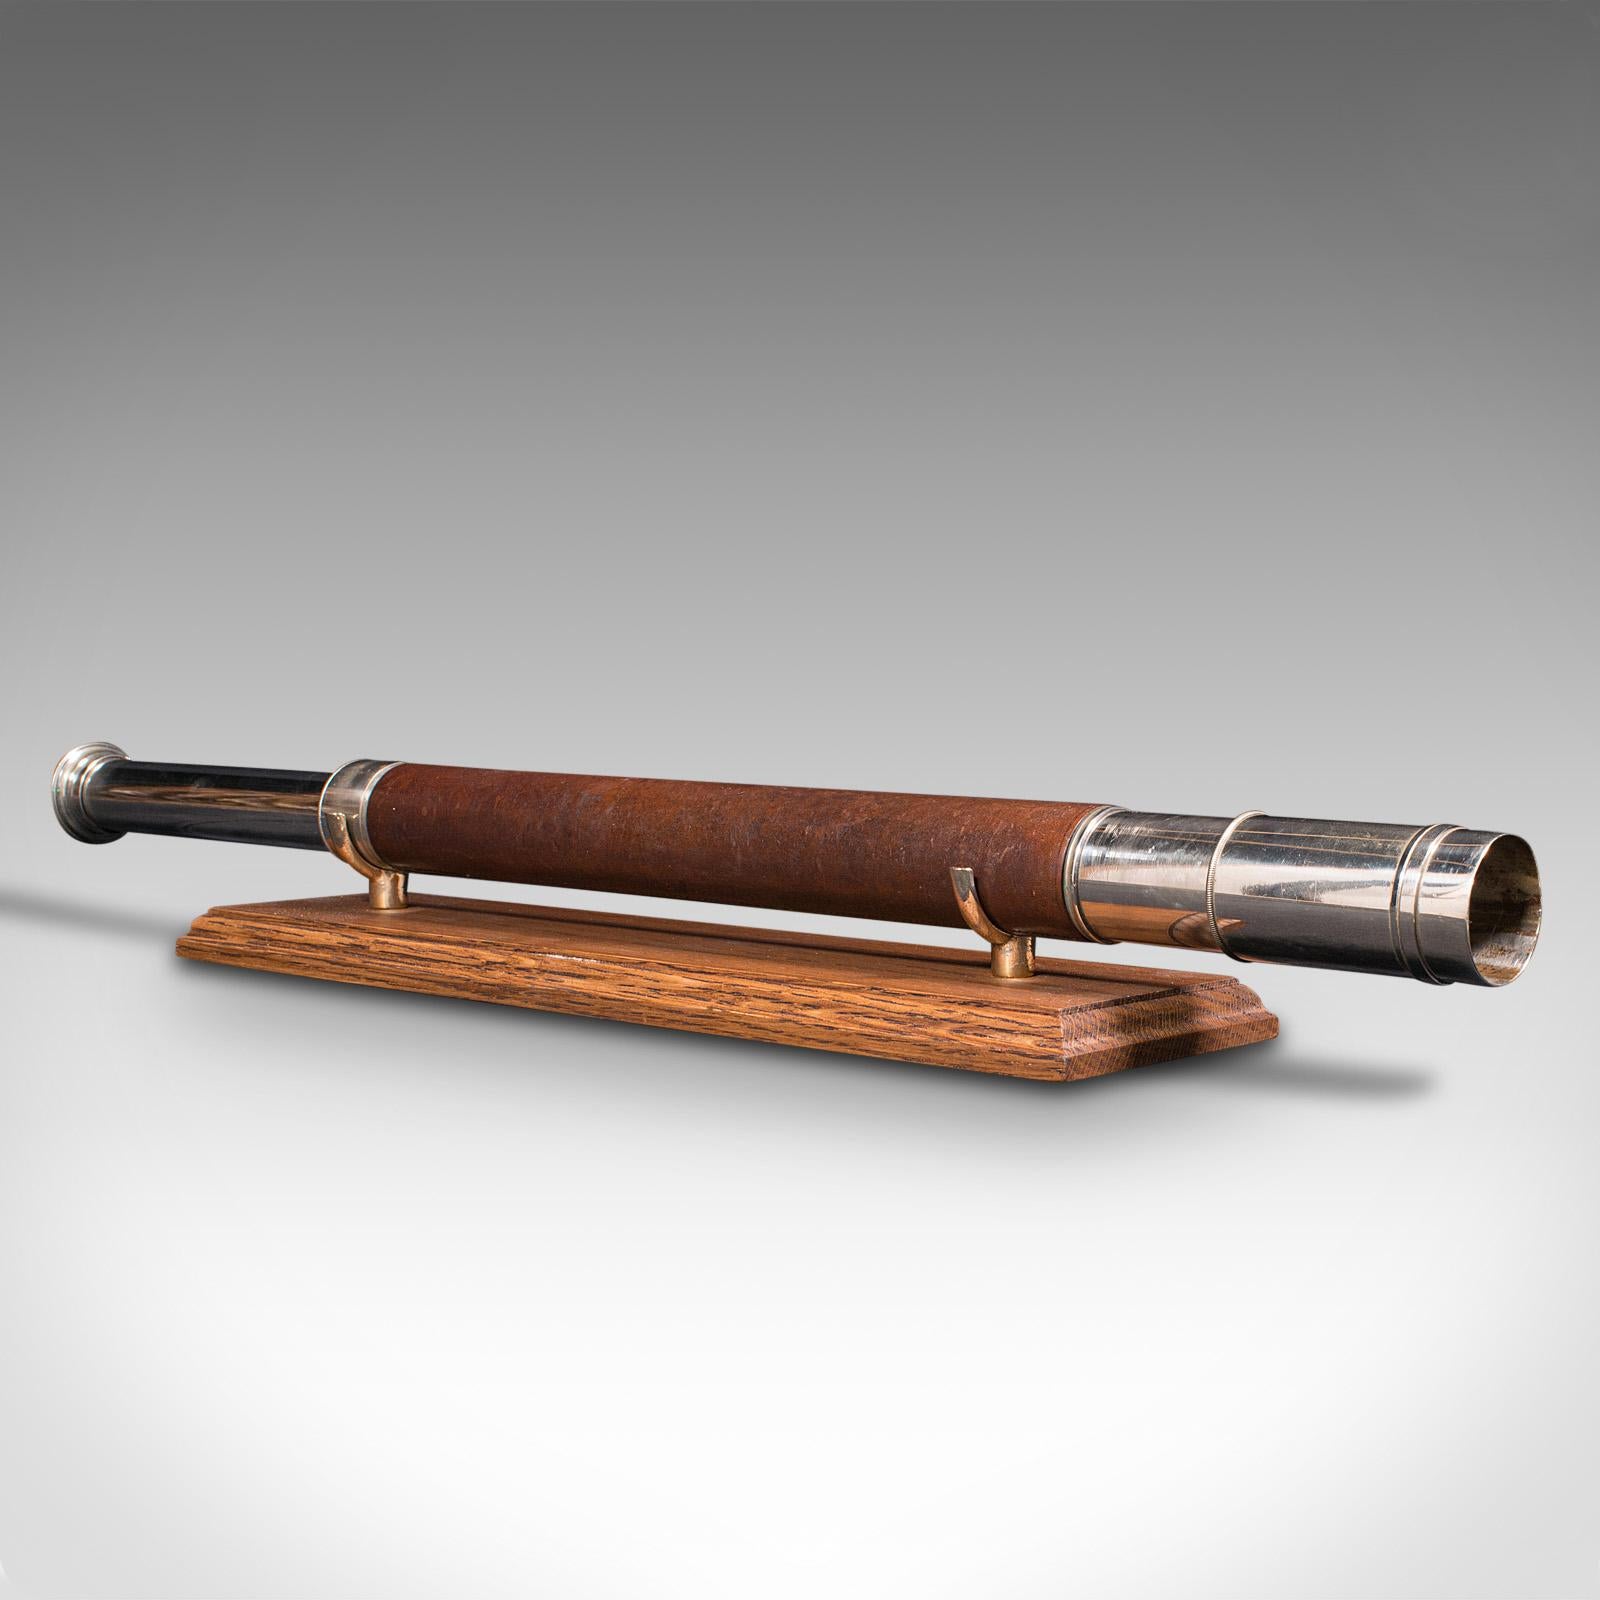 This is an antique officer of the watch telescope. An English, leather and nickel silver single draw refractor for terrestrial or astronomical use, by Ross of London, circa 1920.

Perfect for bird watching, landscape appreciation, wildlife, or